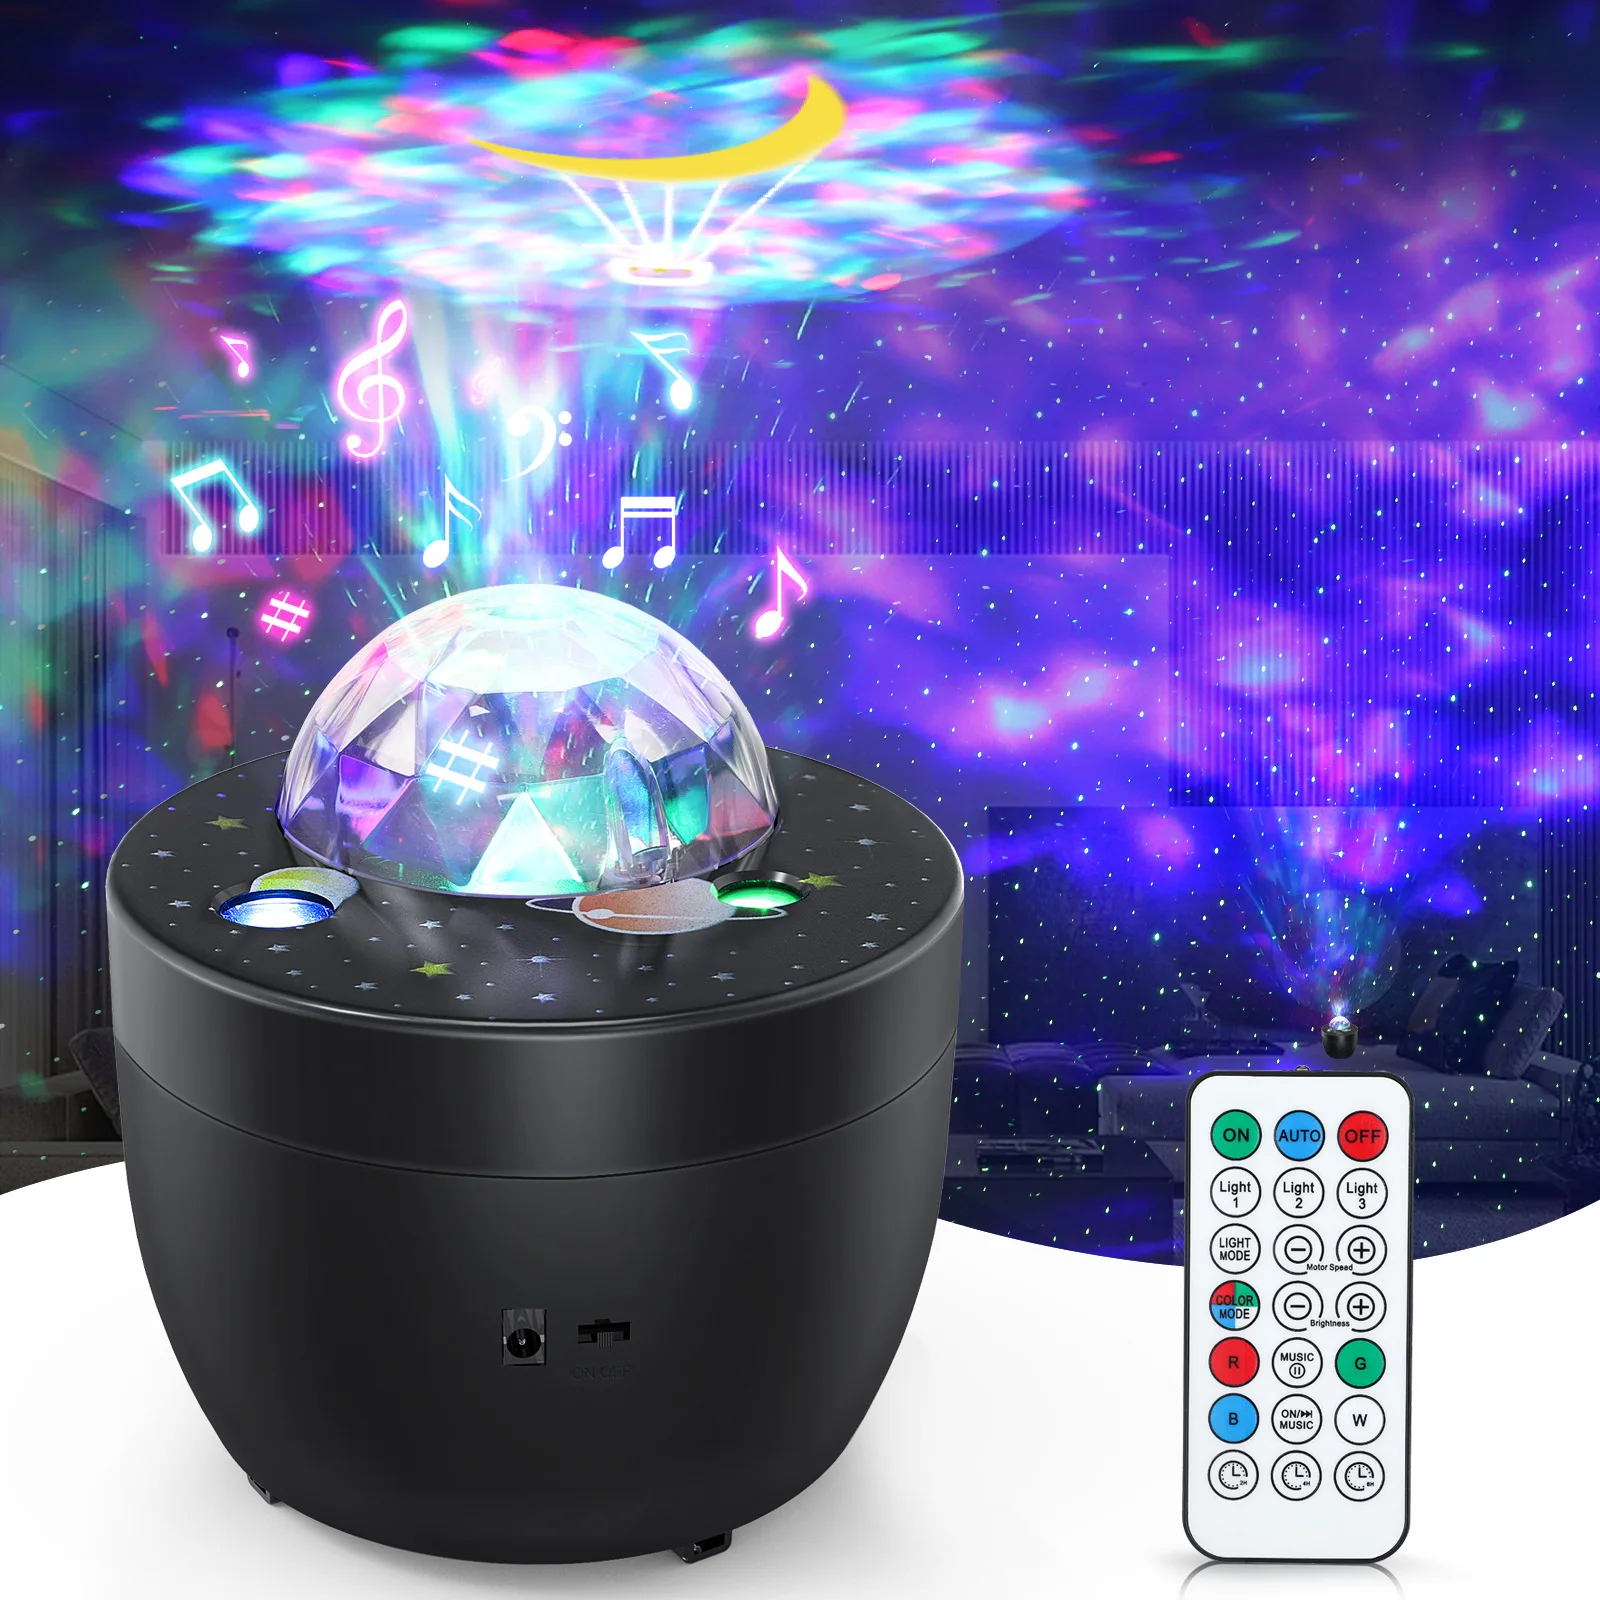 Galaxy Projector Dropshipping Ocean Wave Starry Sky Projection Lamp 360 Degree Rotating, Music Night Light Children's Gift 2021